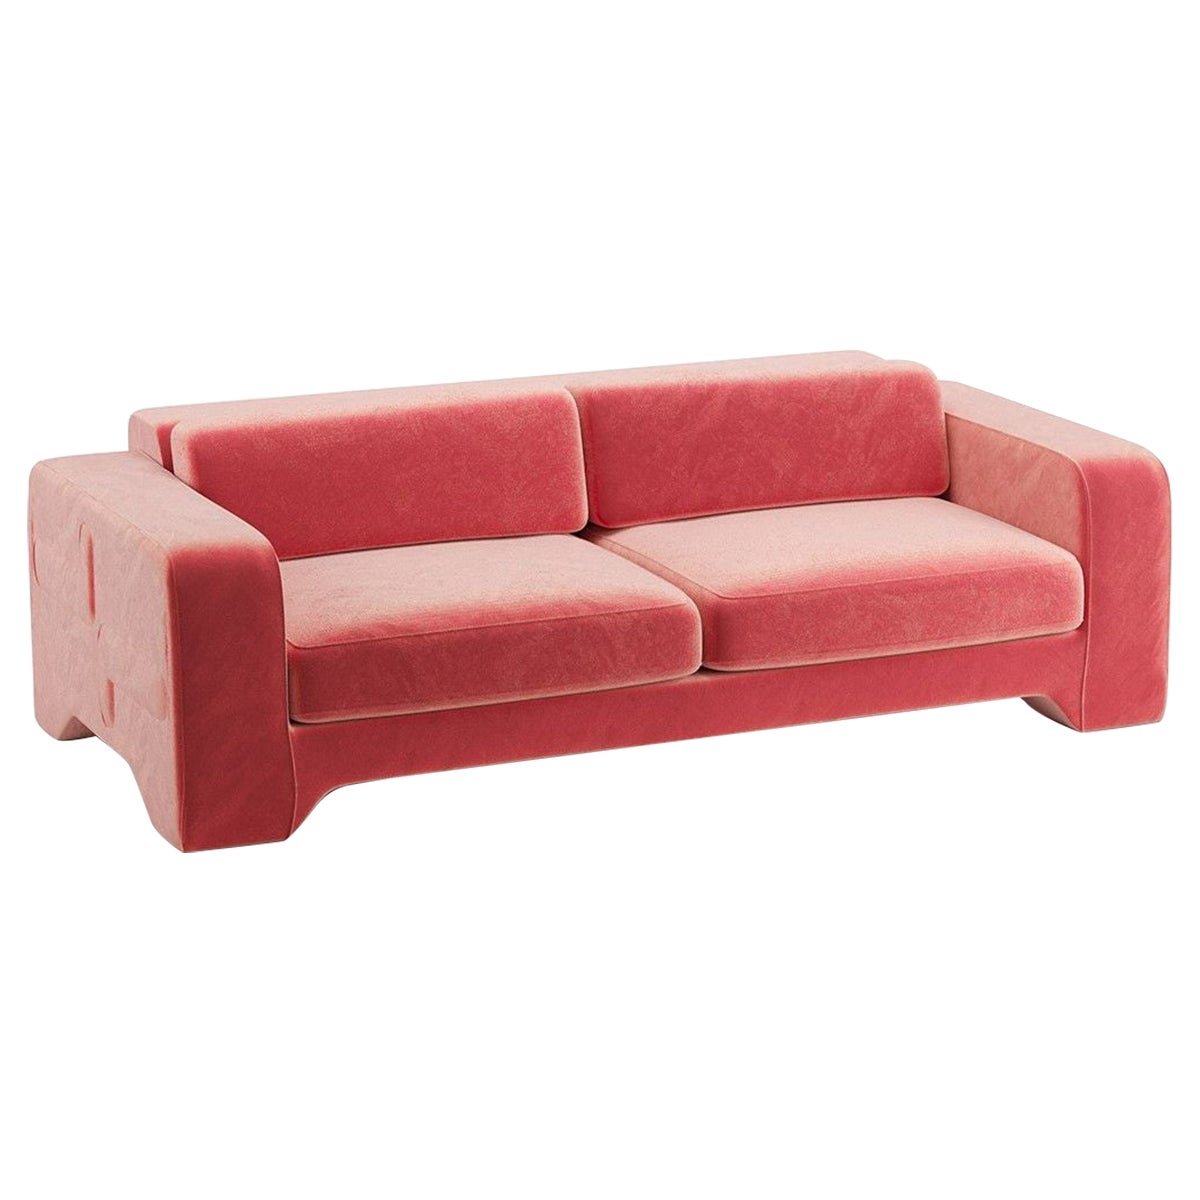 Popus Editions Giovanna 3 Seater Sofa in Pink Como Velvet Upholstery